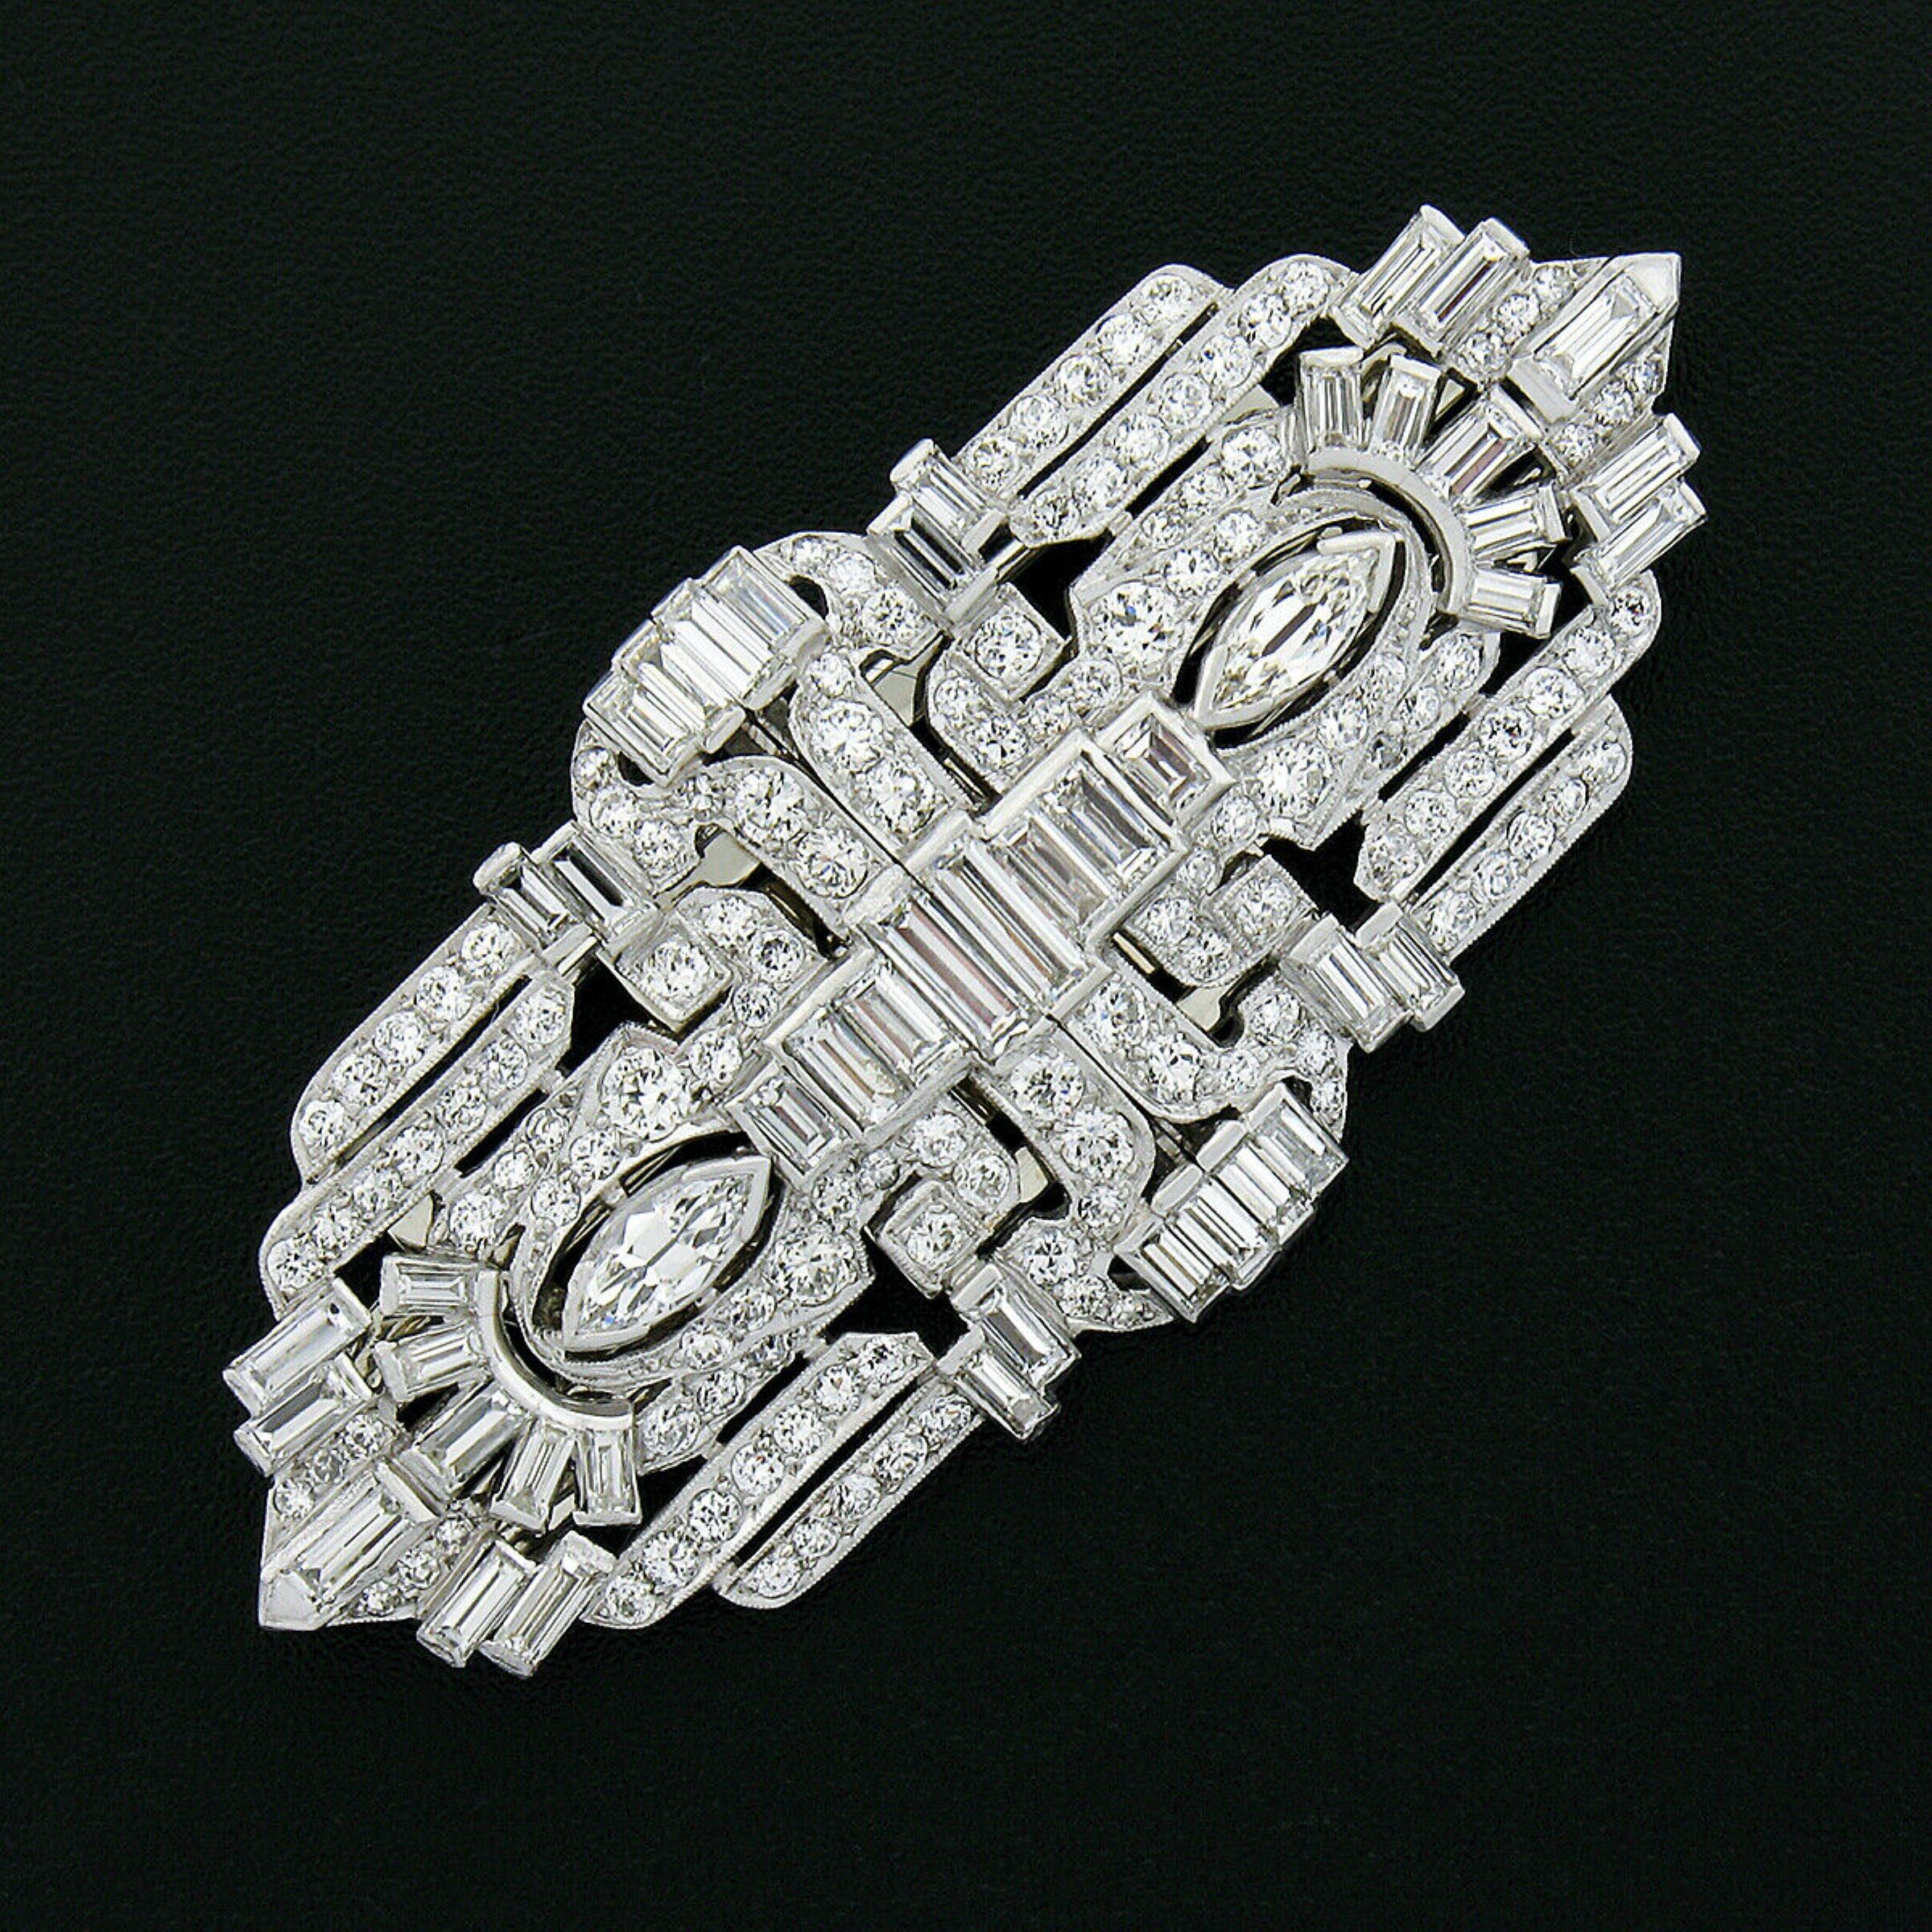 Here we have a gorgeous and very lovely pair of antique diamond dress clips that were crafted from solid .900 platinum during the art deco period. Each clip is v-prong set with an old marquise cut diamond weighing approximately 0.30 carats, channel